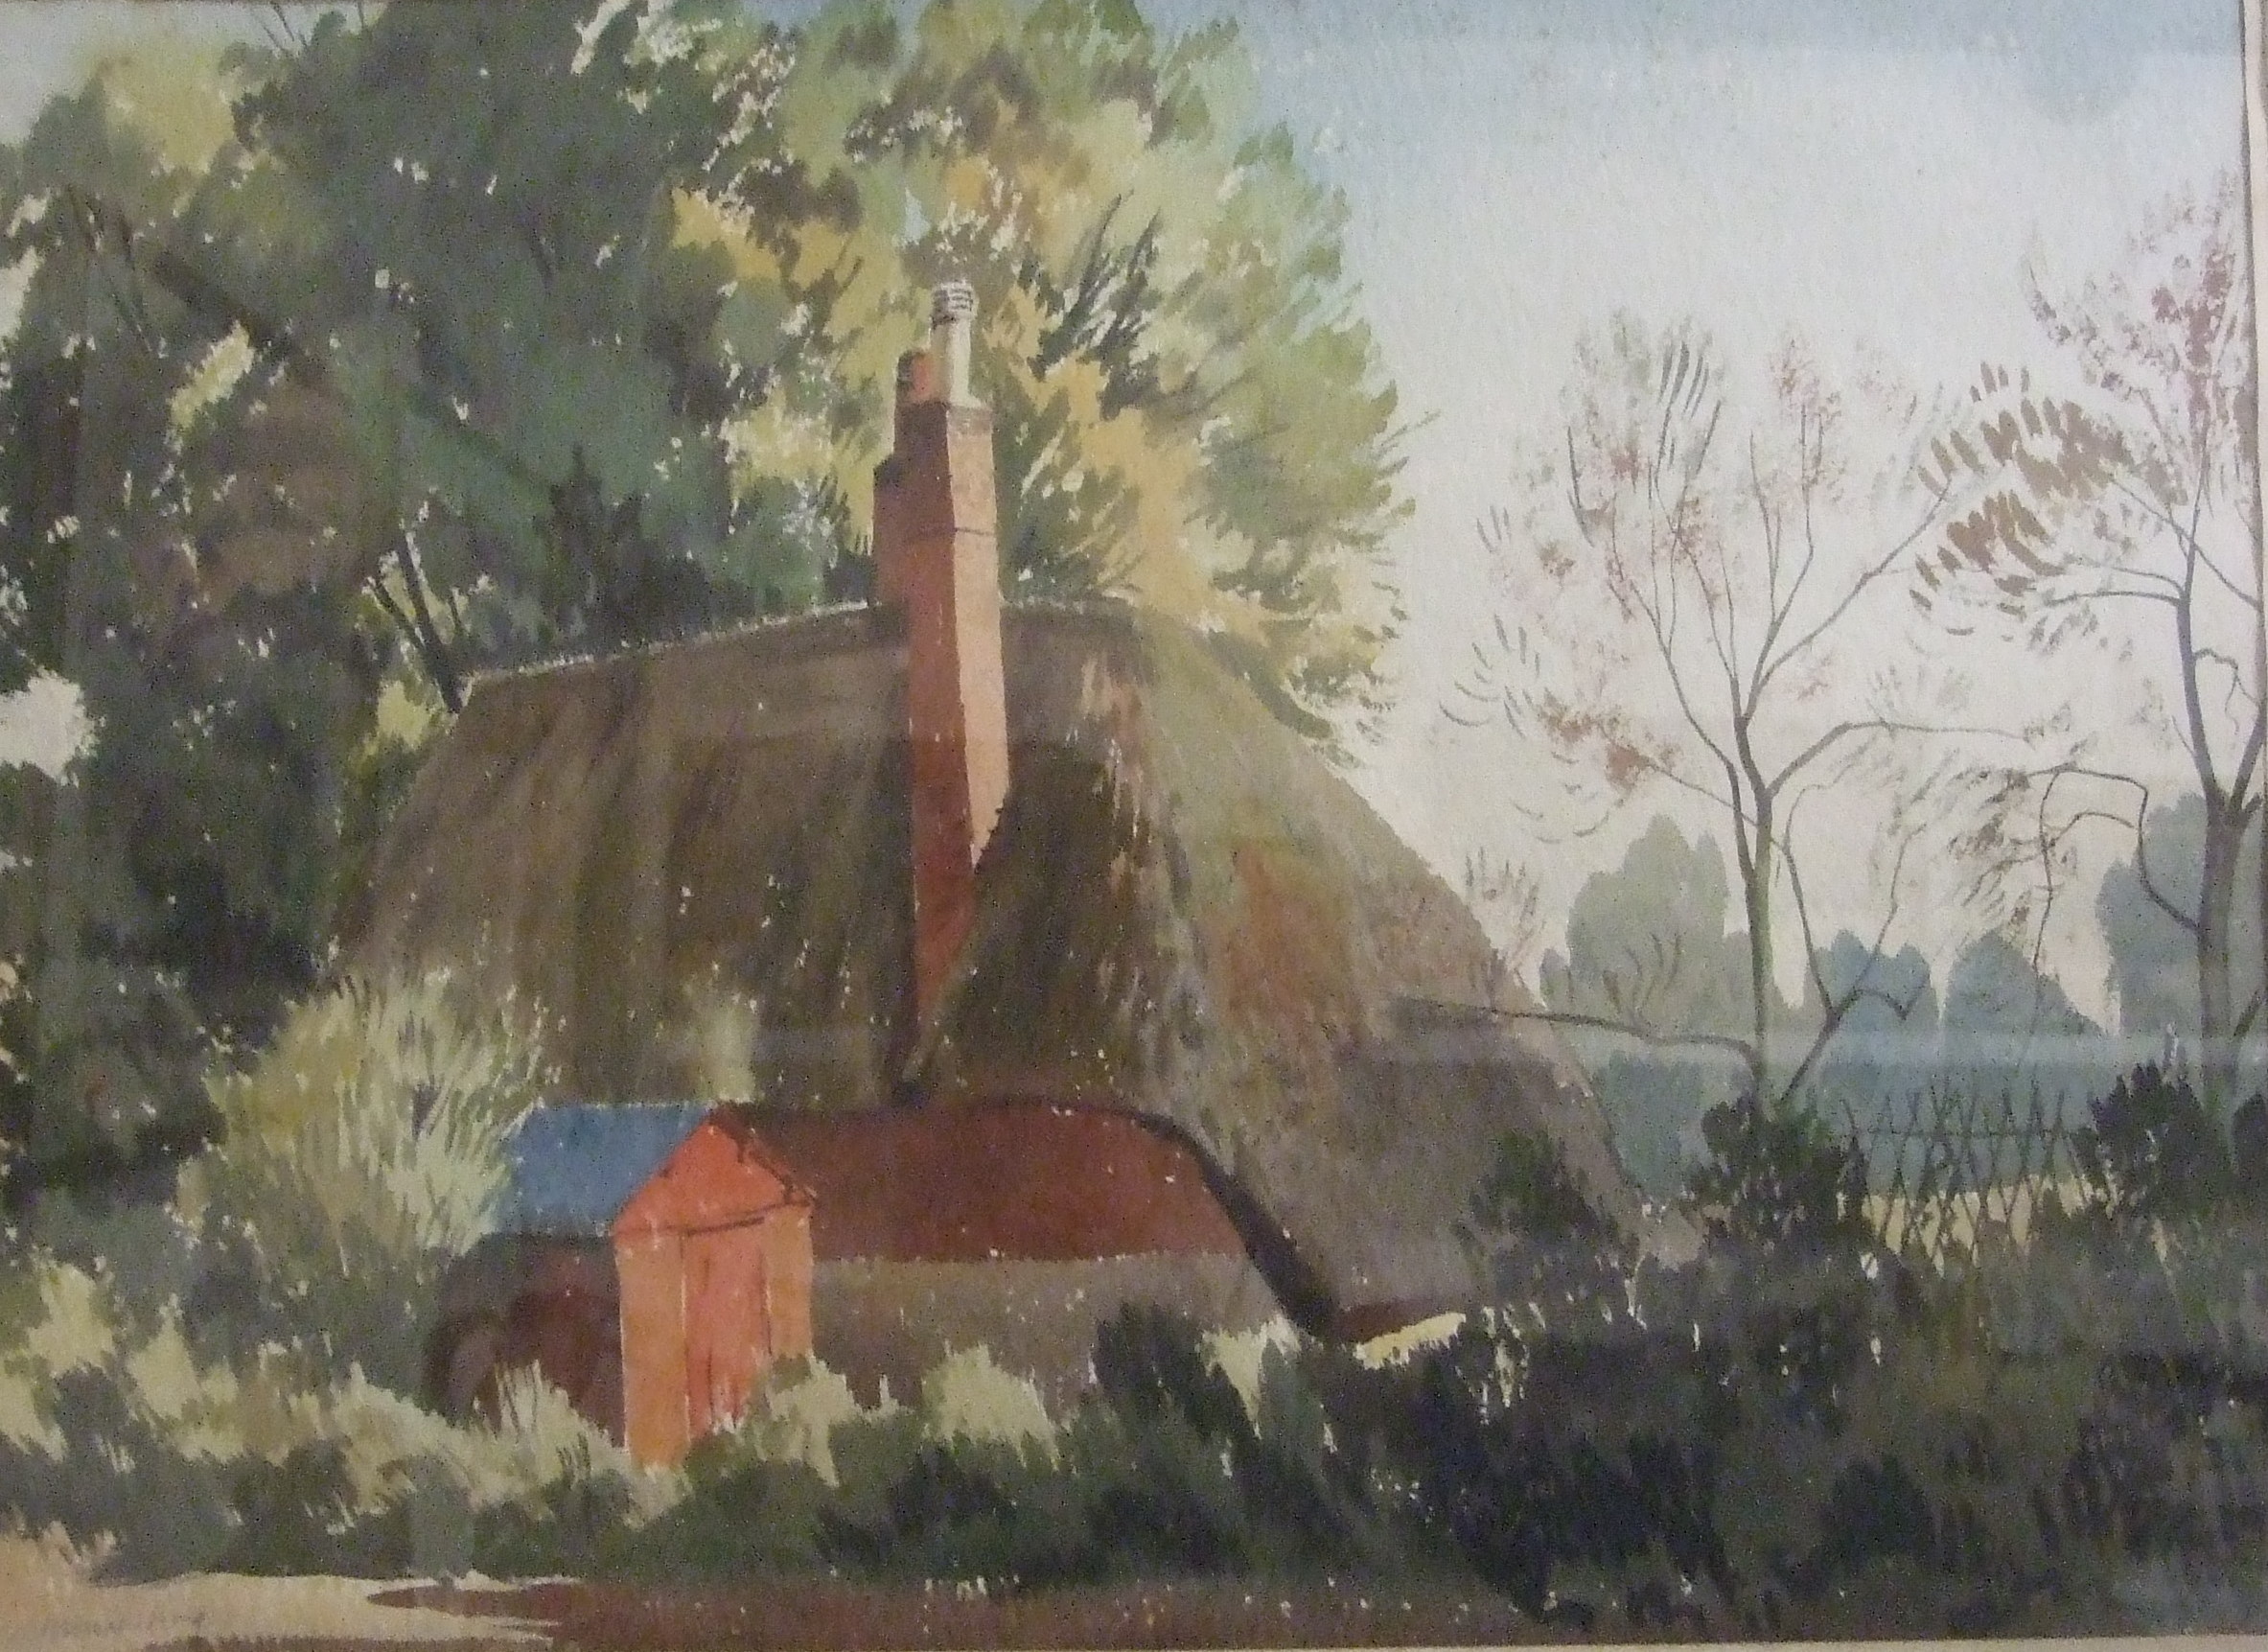 William Dring, a thatched cottage in a landscape, watercolour, signed, 32 x 45 cm